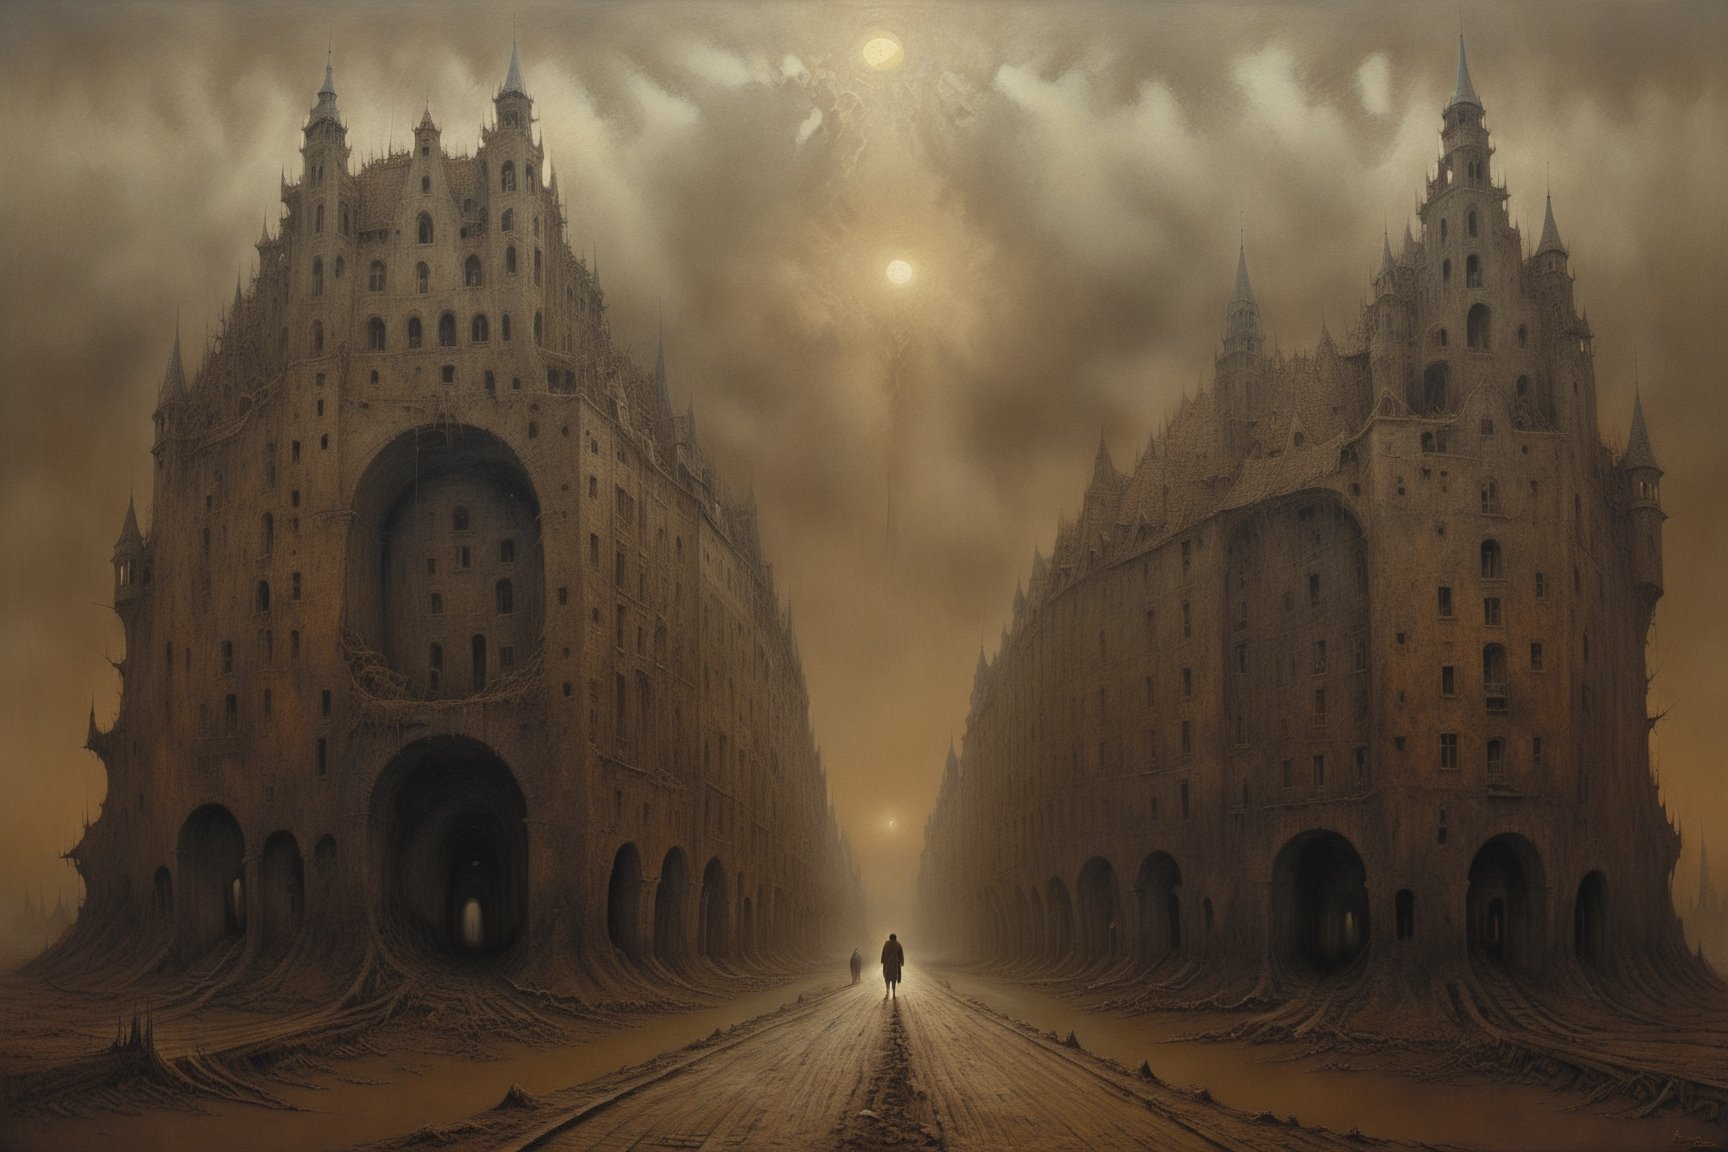 Painting made by Zdzislaw Beksinski, depressing view, victorian city, landspace, masterpiece, megalophobia, acid trip, unsettling feel, oil painting on hardboard, saturated sepia colors, photorealistic, Beksinski,more detail XL,art by sargent